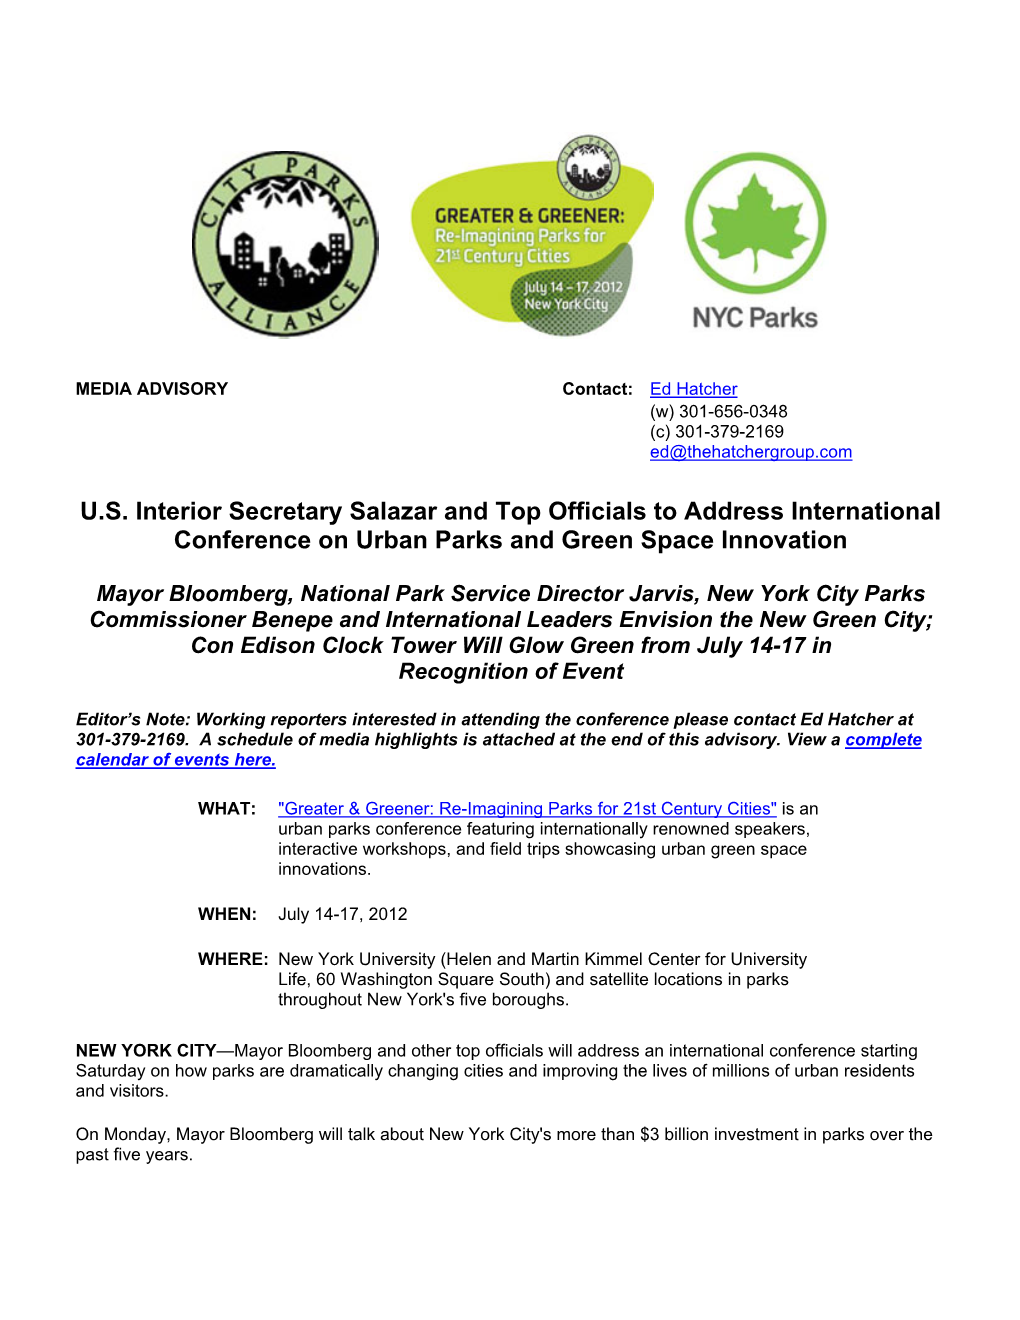 U.S. Interior Secretary Salazar and Top Officials to Address International Conference on Urban Parks and Green Space Innovation